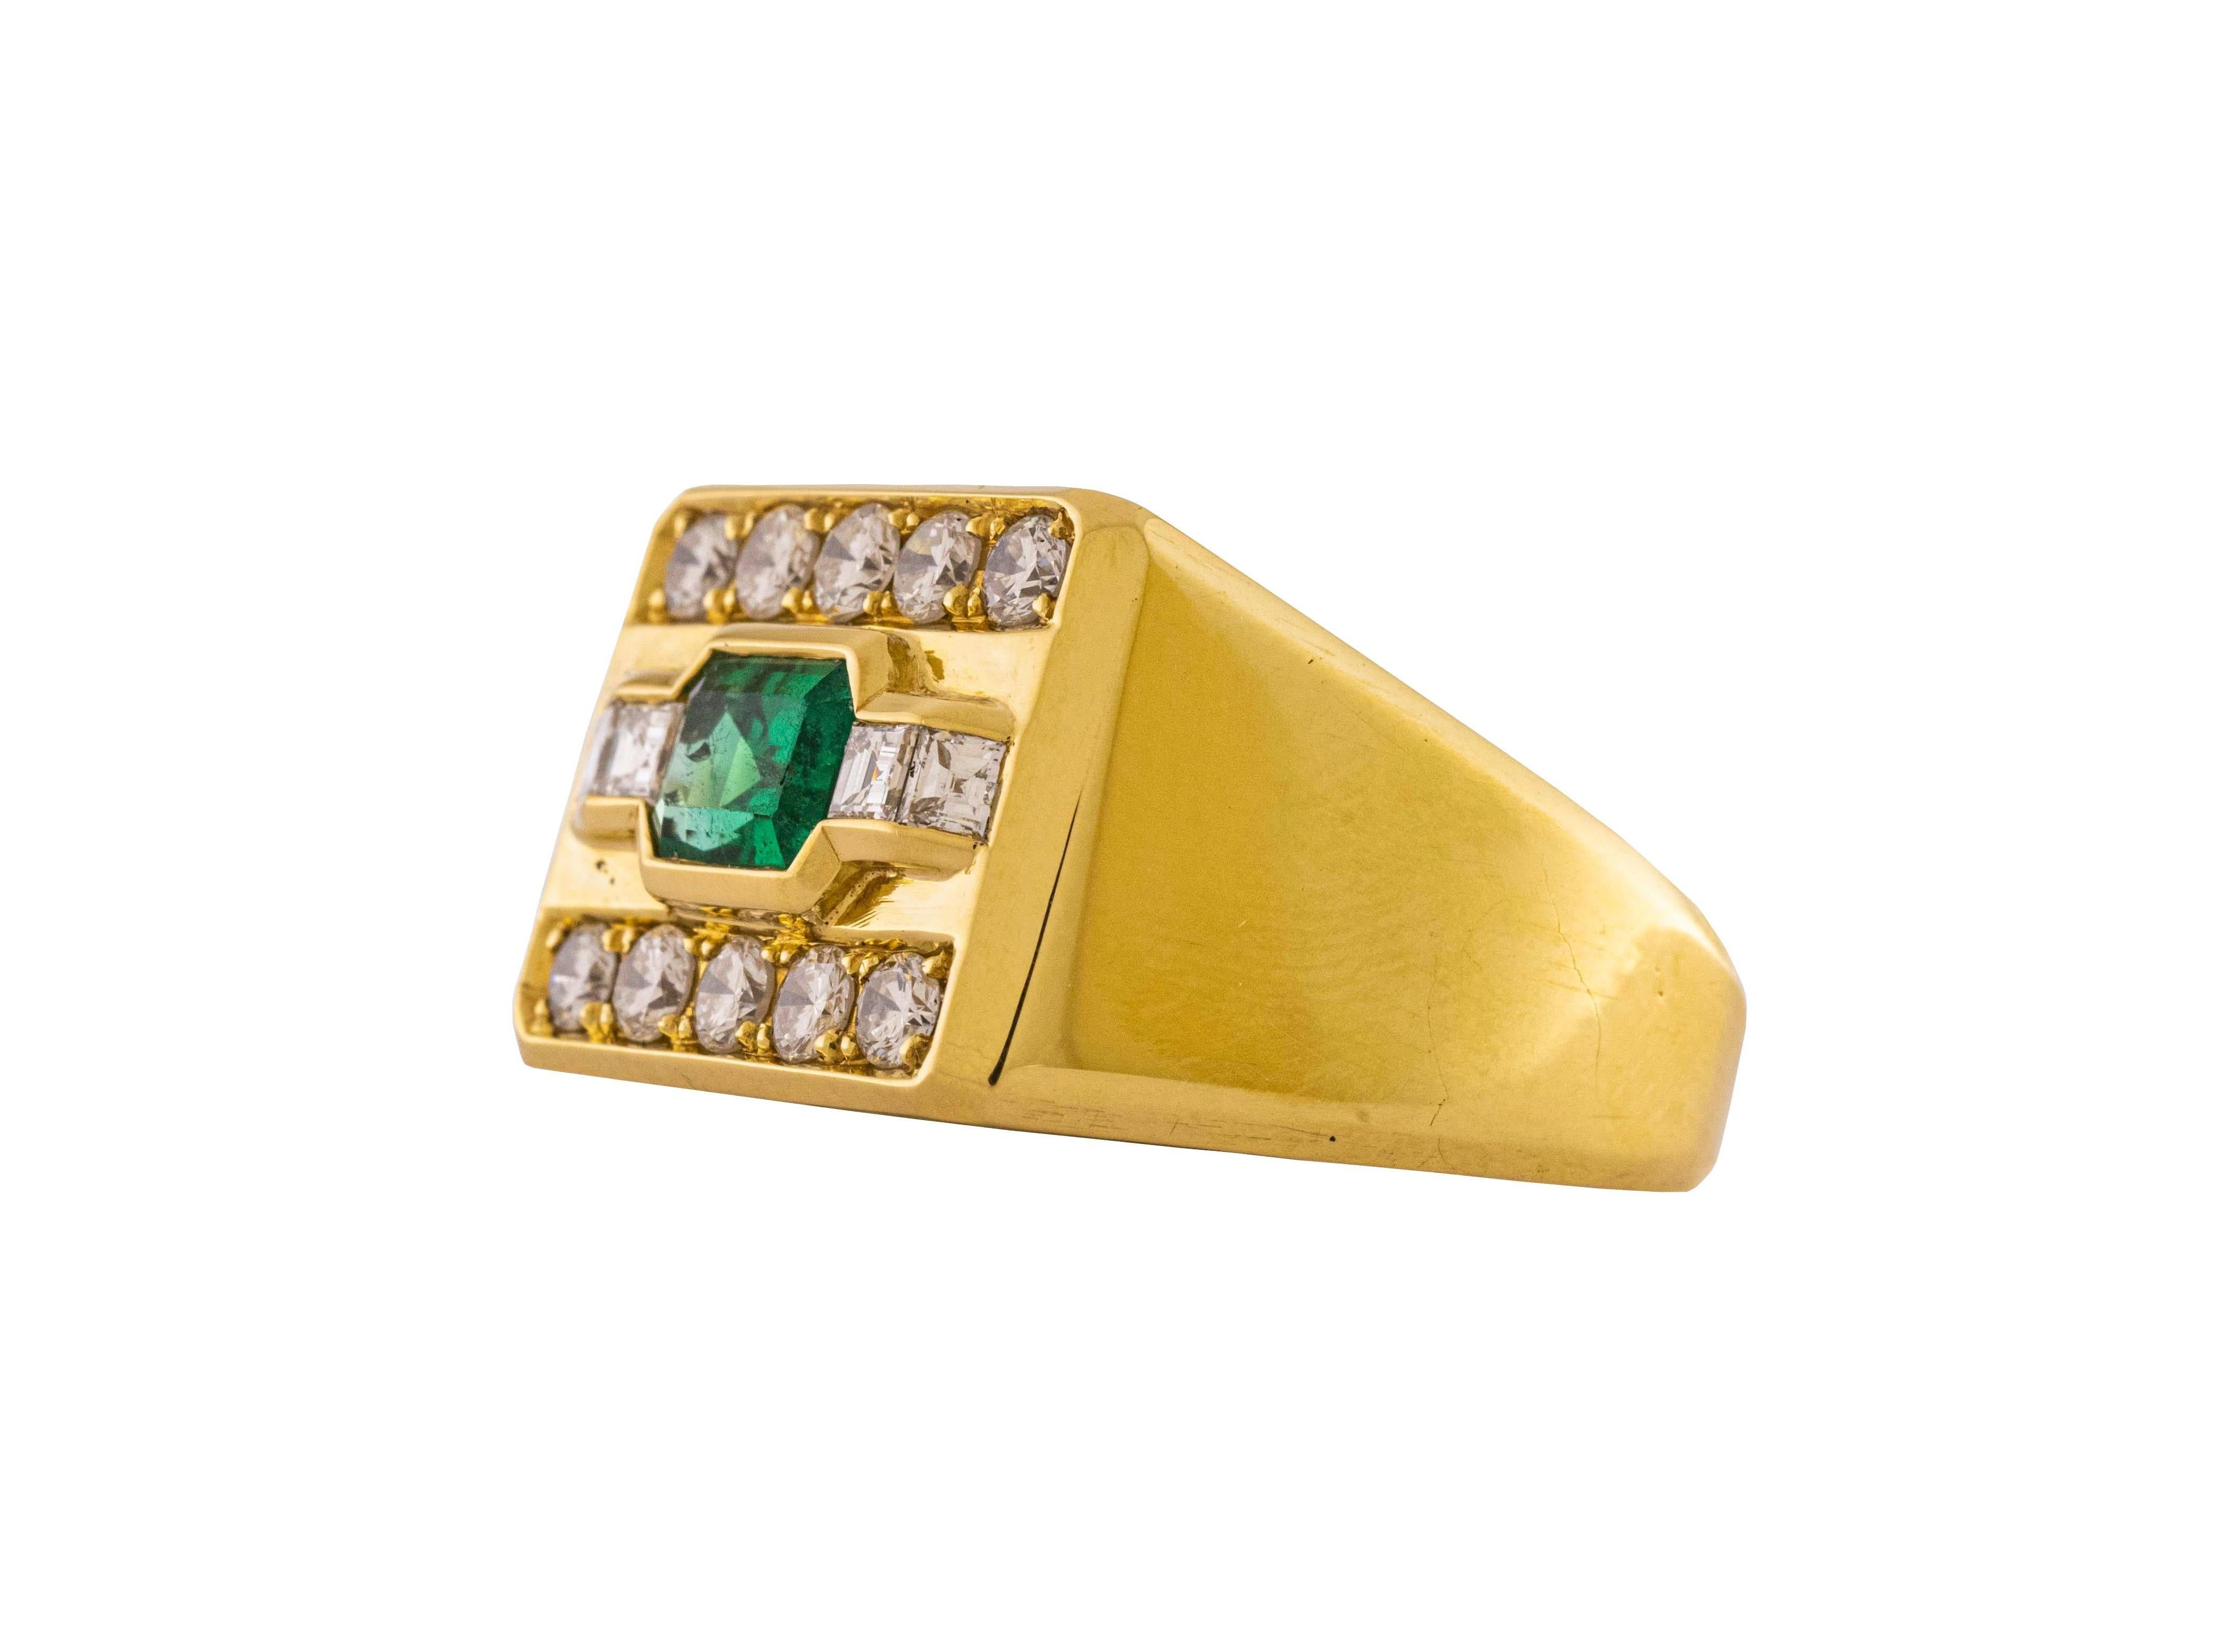 Mixed Cut Emerald and Diamonds 18 Karat Yellow Gold Cocktail Ring For Sale